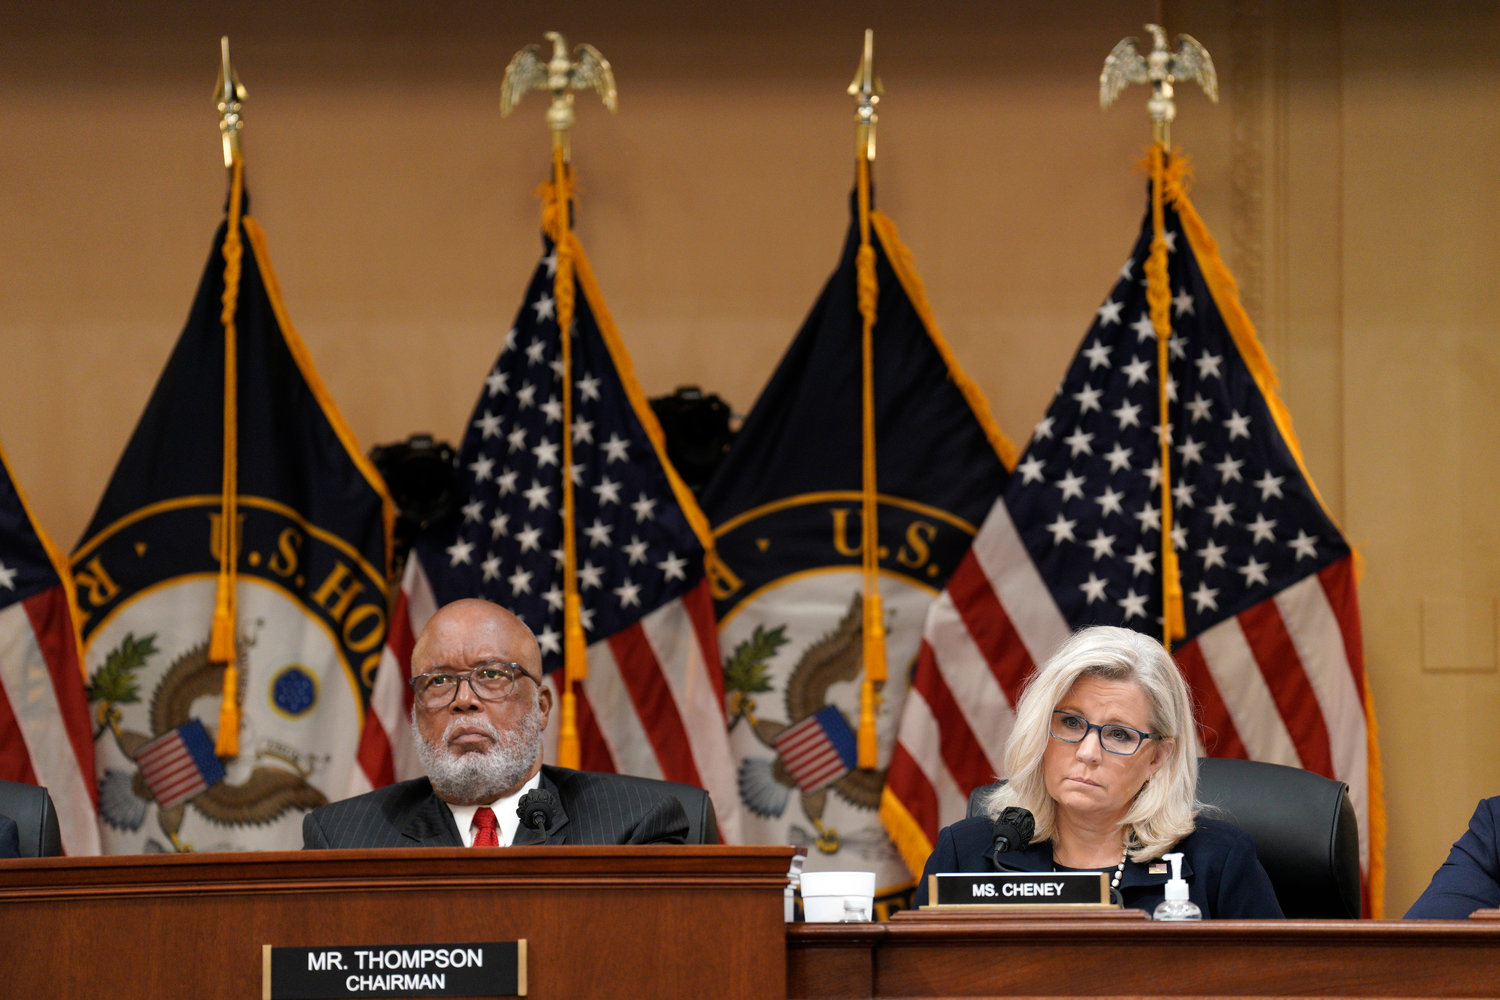 Committee Chairman Rep. Bennie Thompson, D-Miss., and Vice Chair Rep. Liz Cheney, R-Wyo., participate in a House select committee hearing on the Jan. 6, 2021, attack on the U.S. Capitol in Washington, D.C., on June 16, 2022. (Yuri Gripas/Abaca Press/TNS)